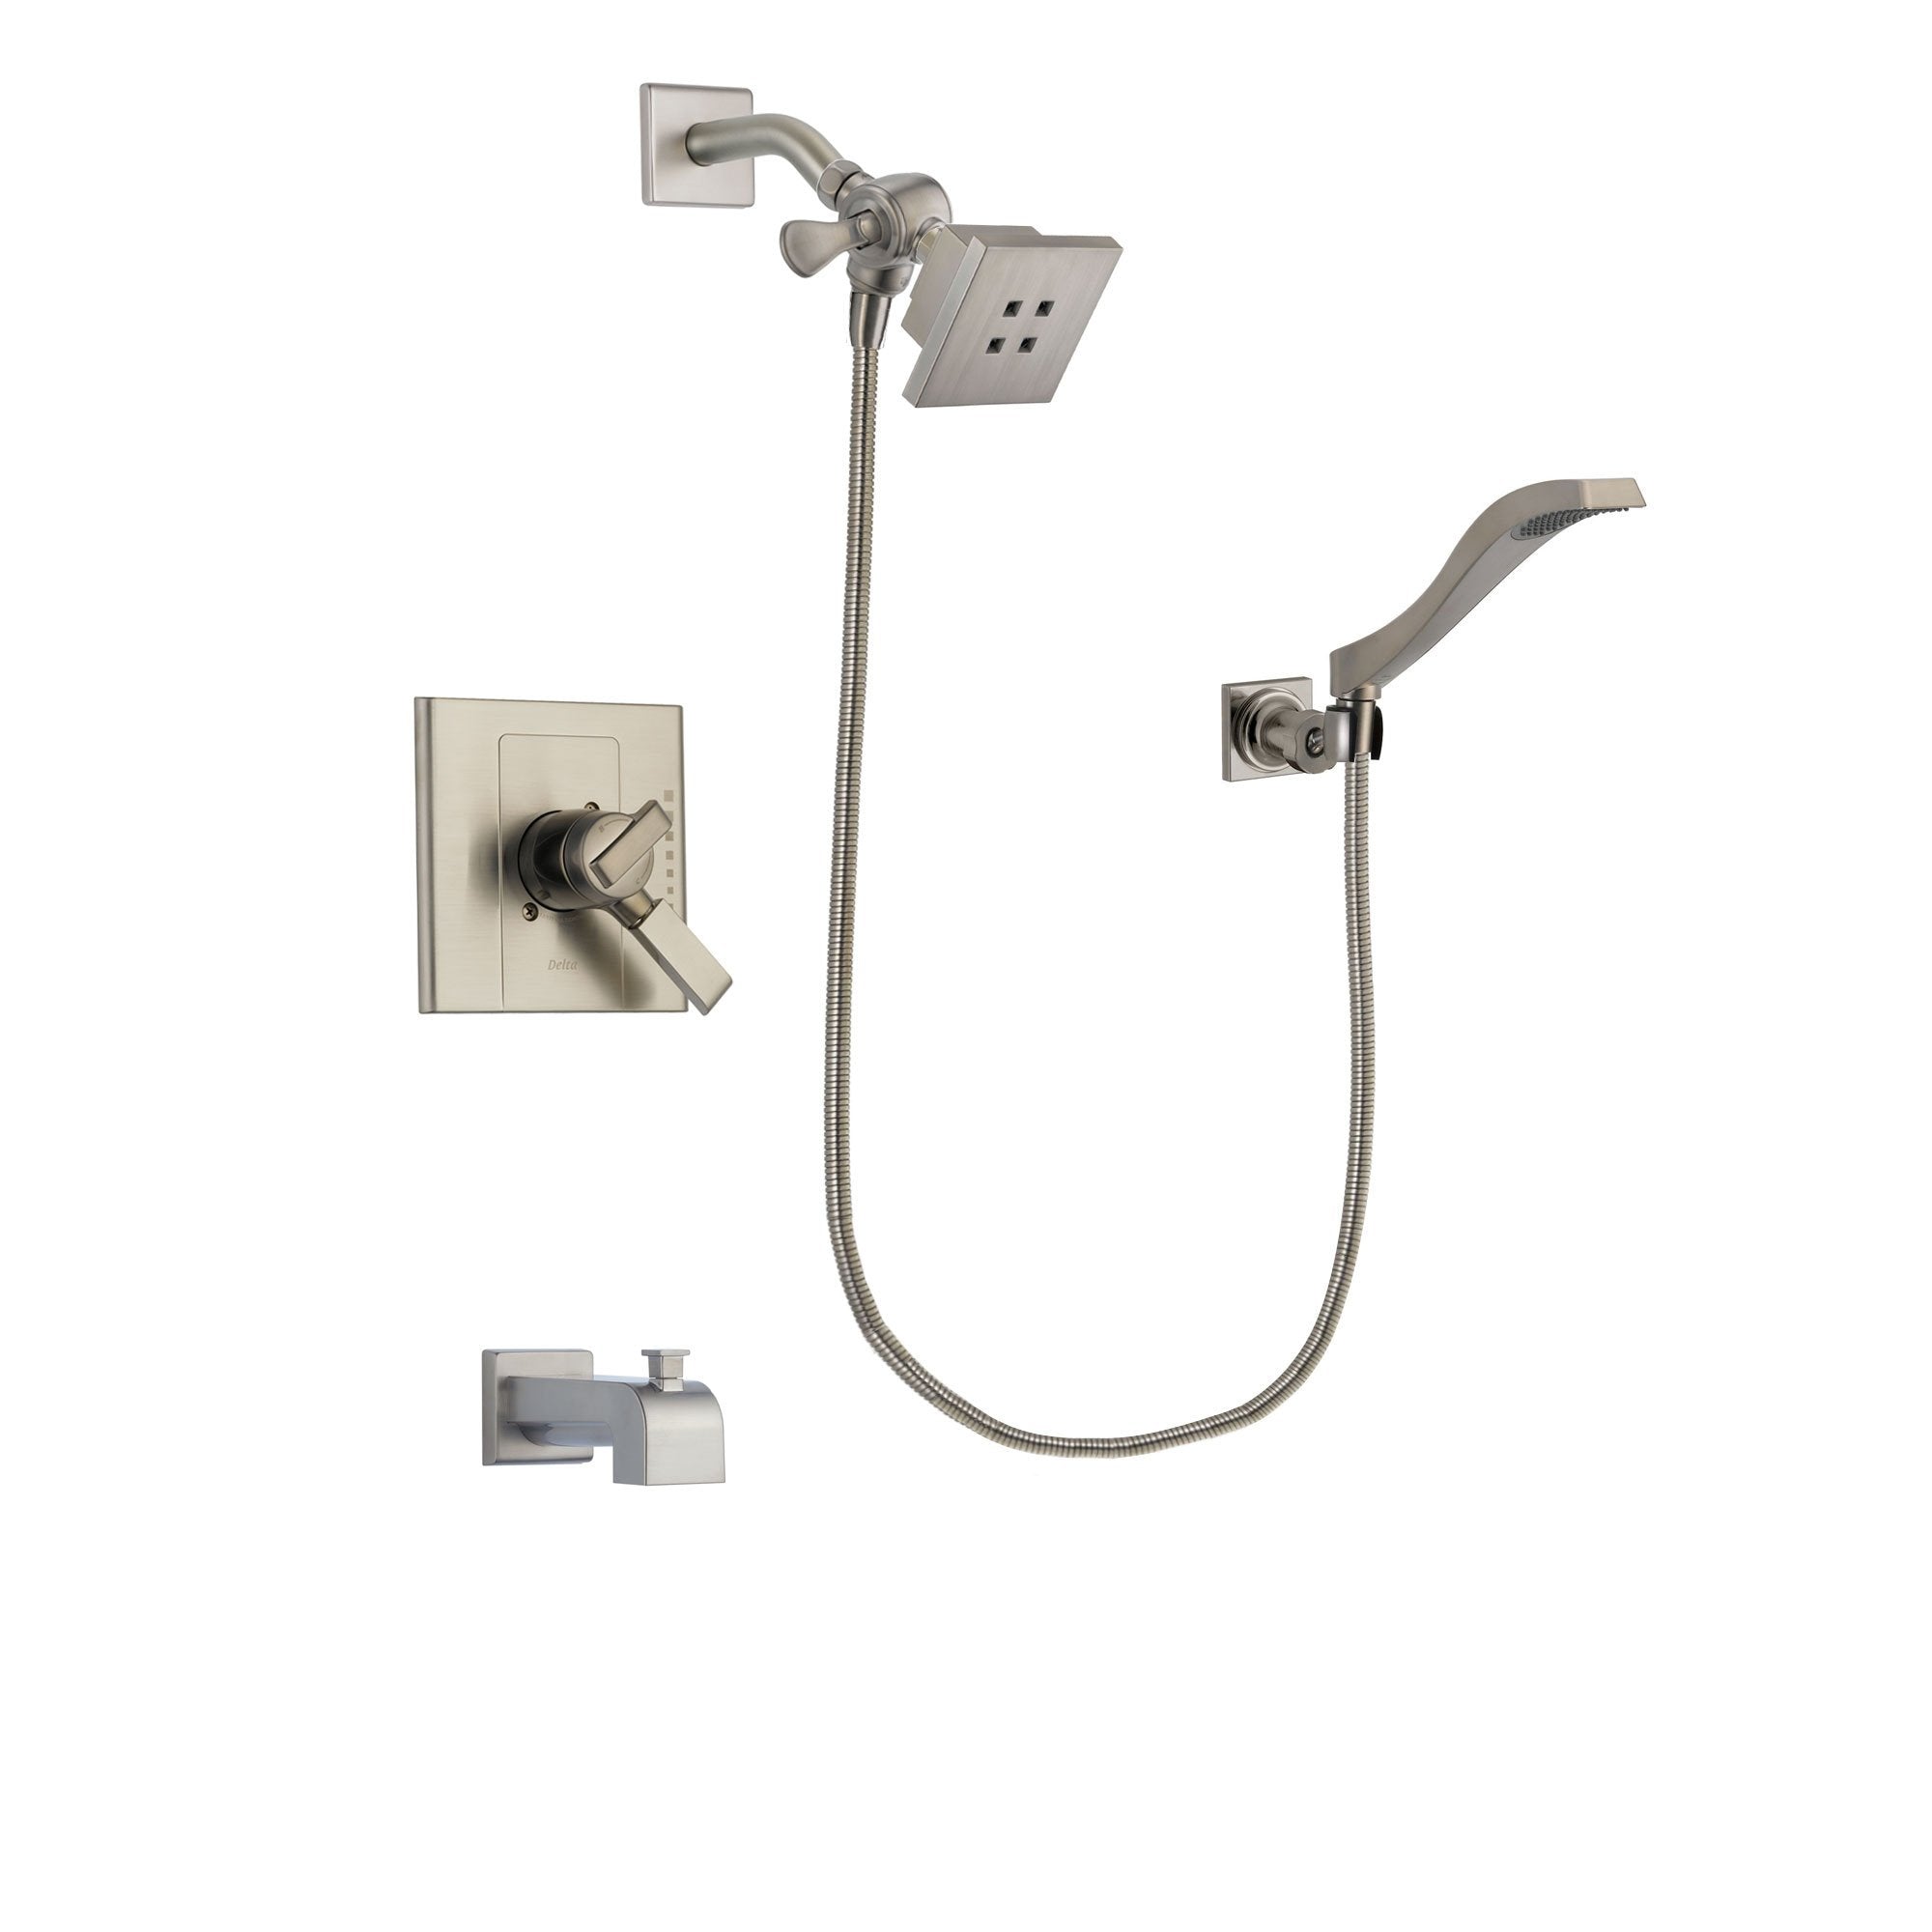 Delta Arzo Stainless Steel Finish Dual Control Tub and Shower Faucet System Package with Square Showerhead and Modern Wall Mount Handheld Shower Spray Includes Rough-in Valve and Tub Spout DSP2073V